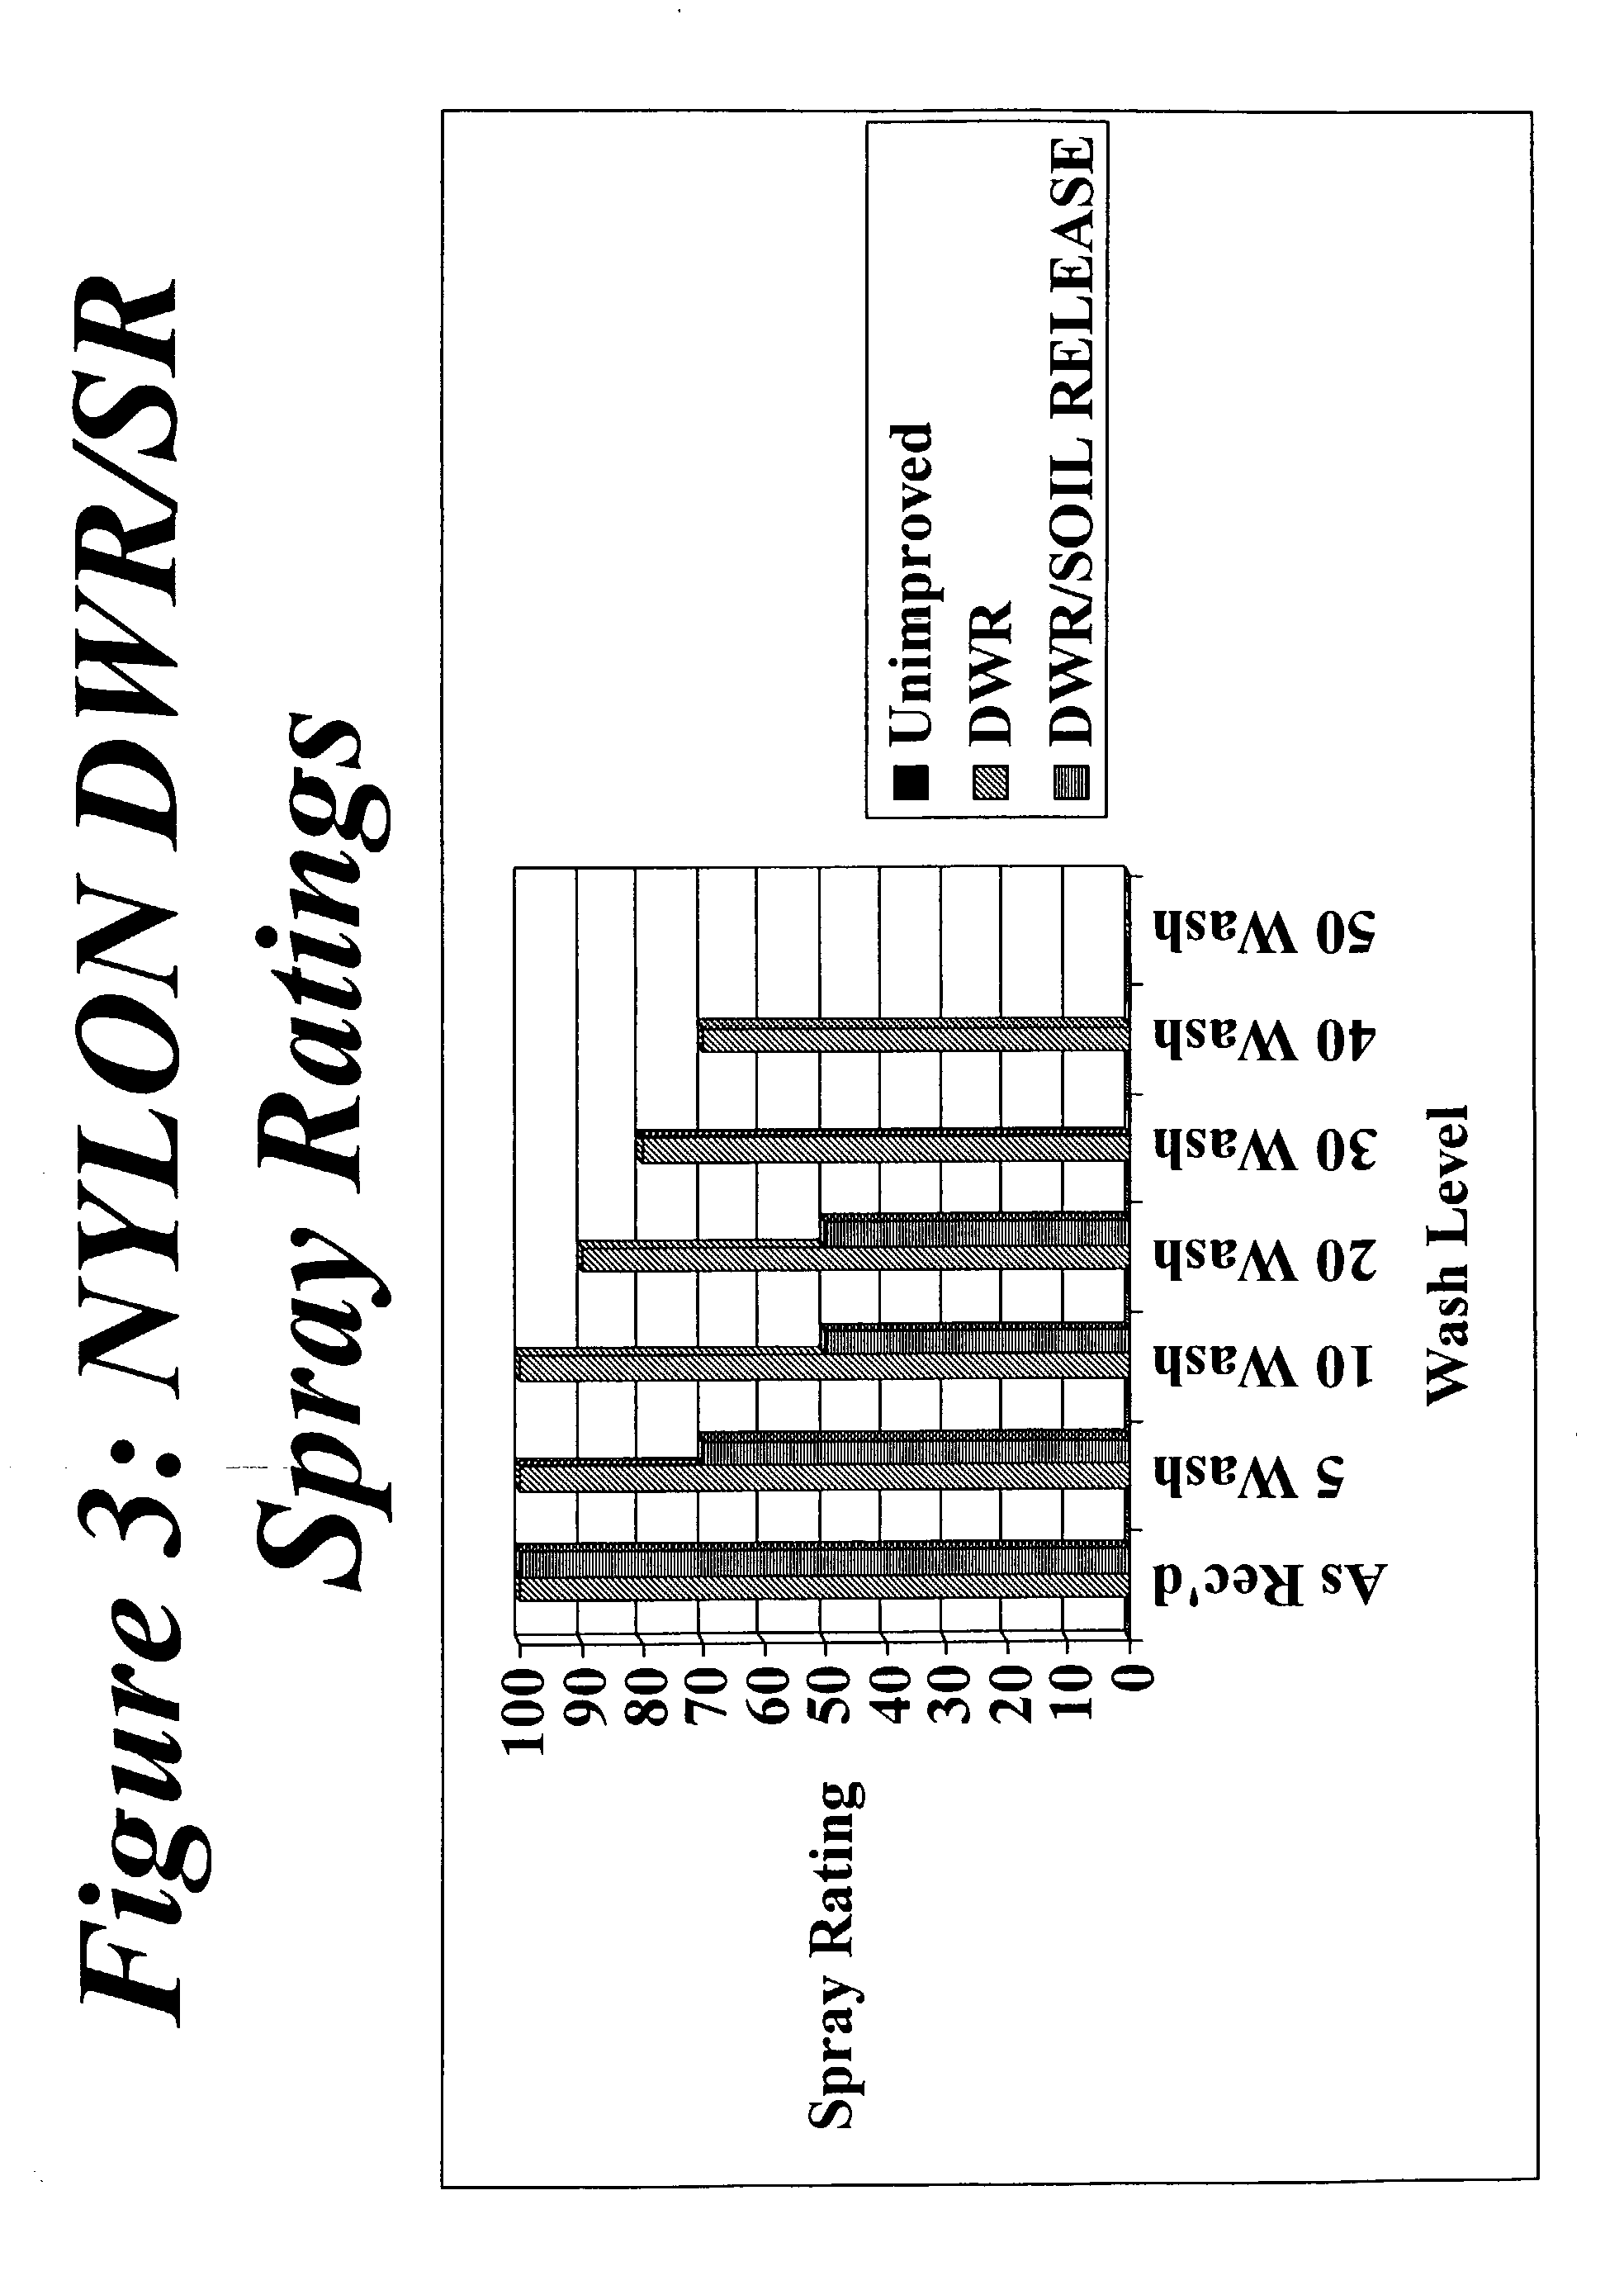 Textile substrates having improved durable water repellency and soil release and method for producing same